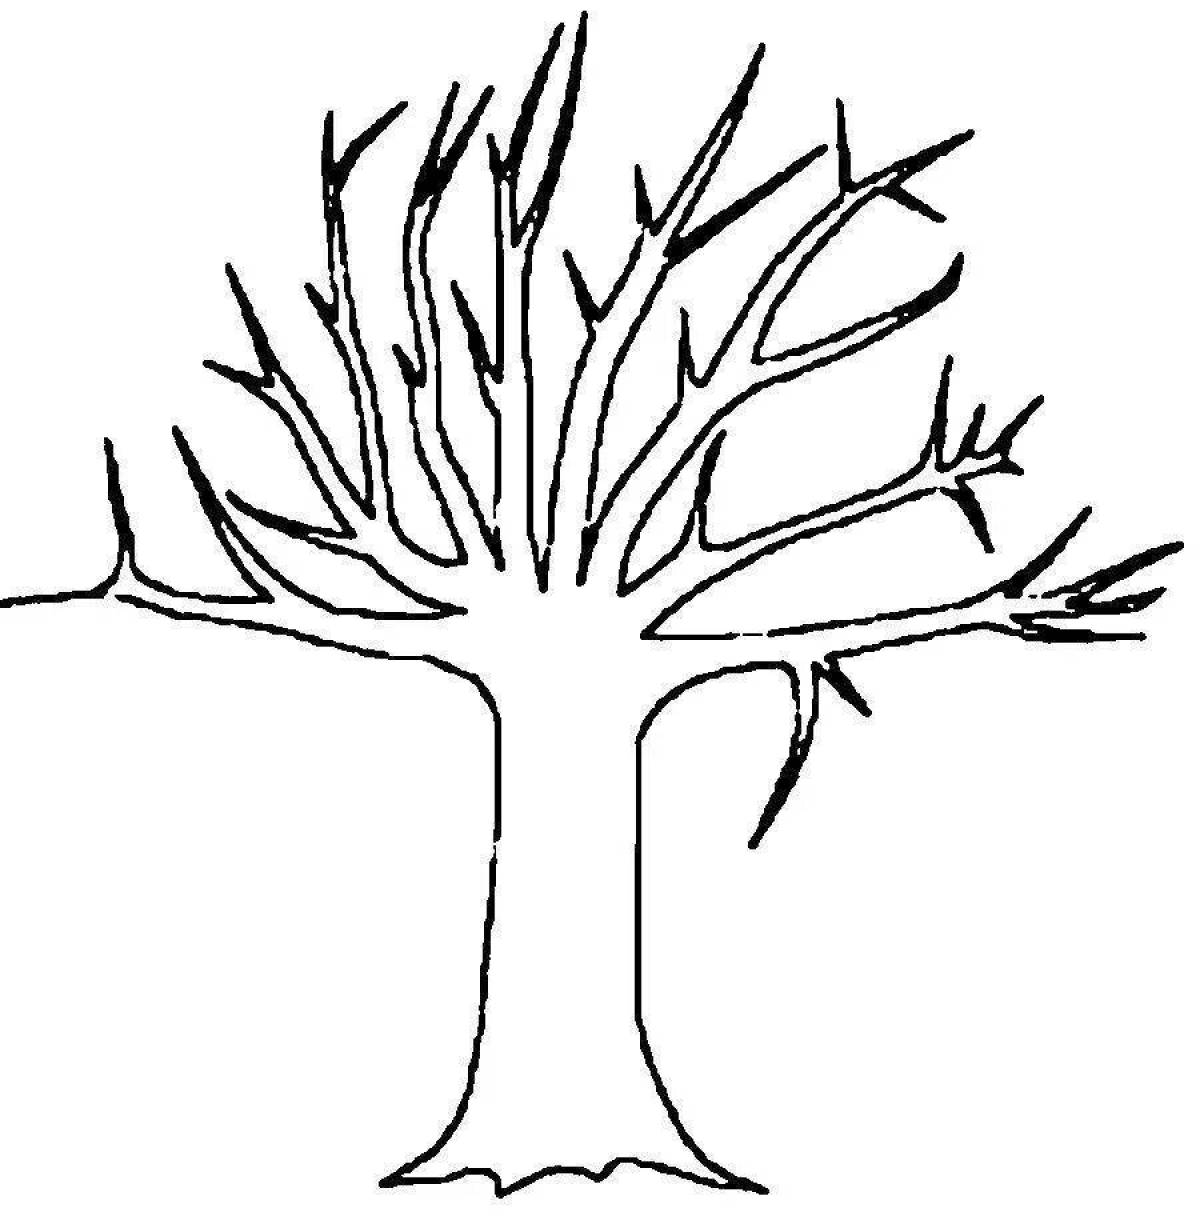 A funny drawing of a sprawling tree